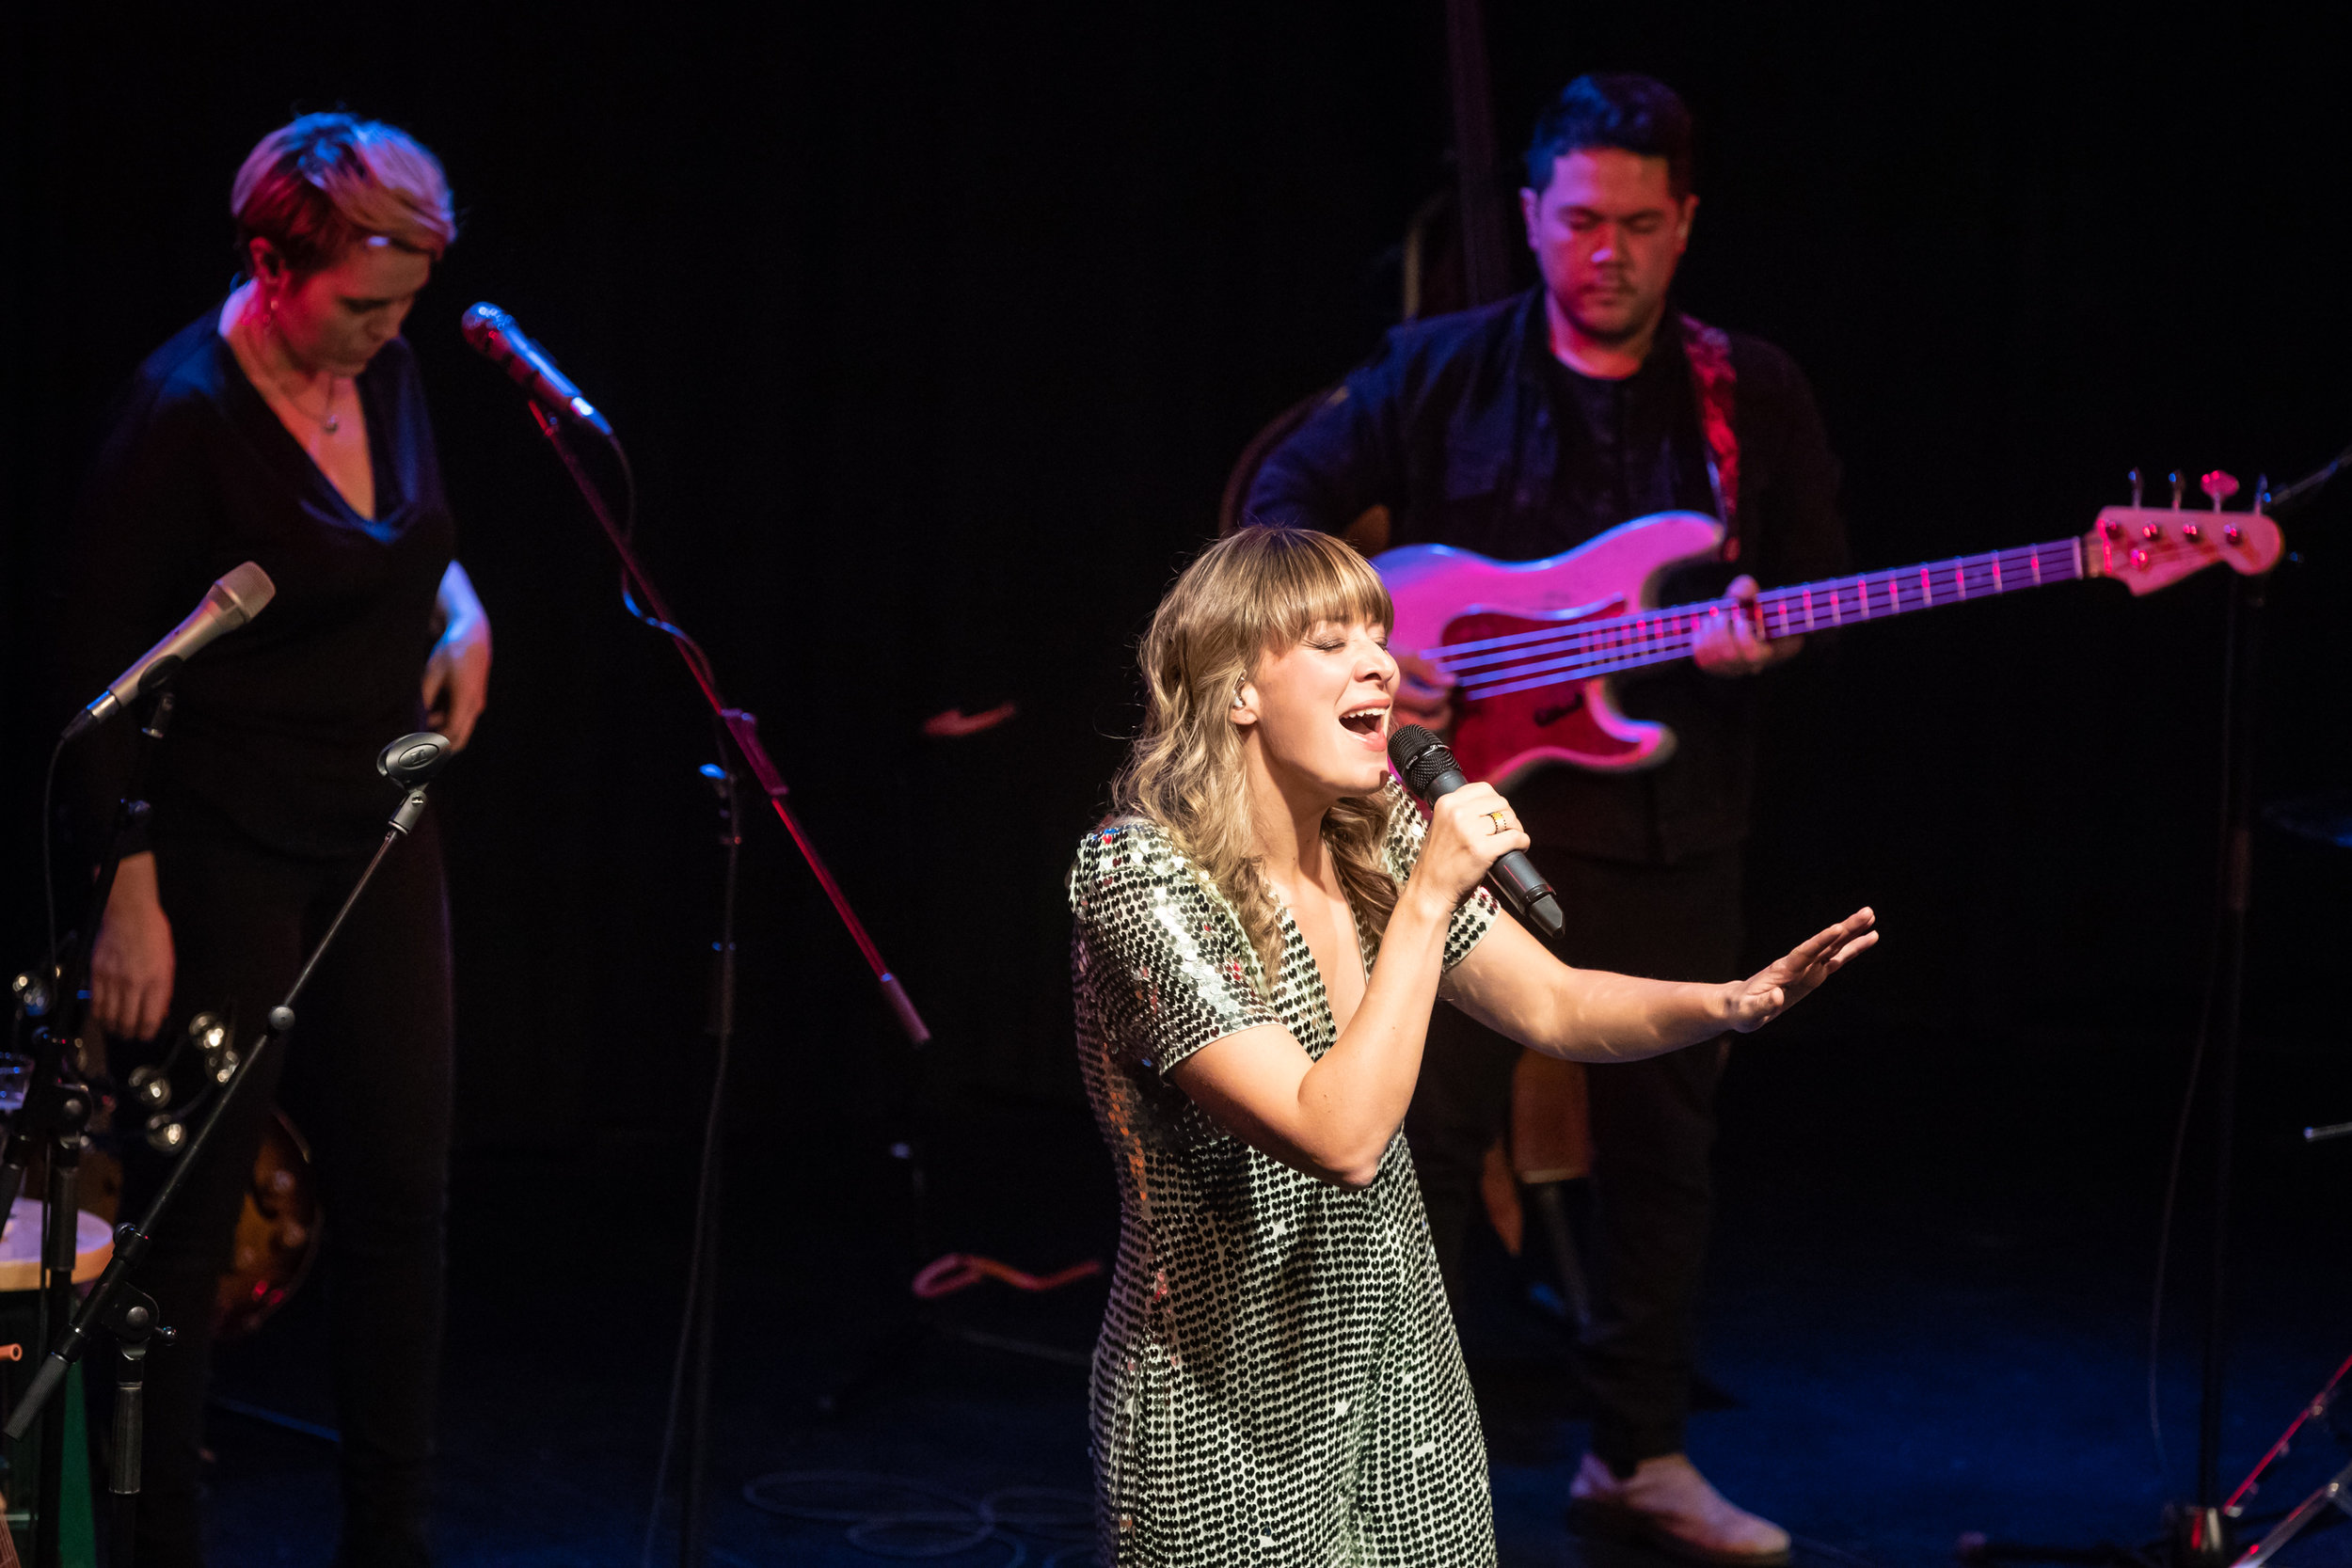  Jill Barber at the West End Cultural Centre on Monday October 22, 2018  Photo by Matt Duboff 